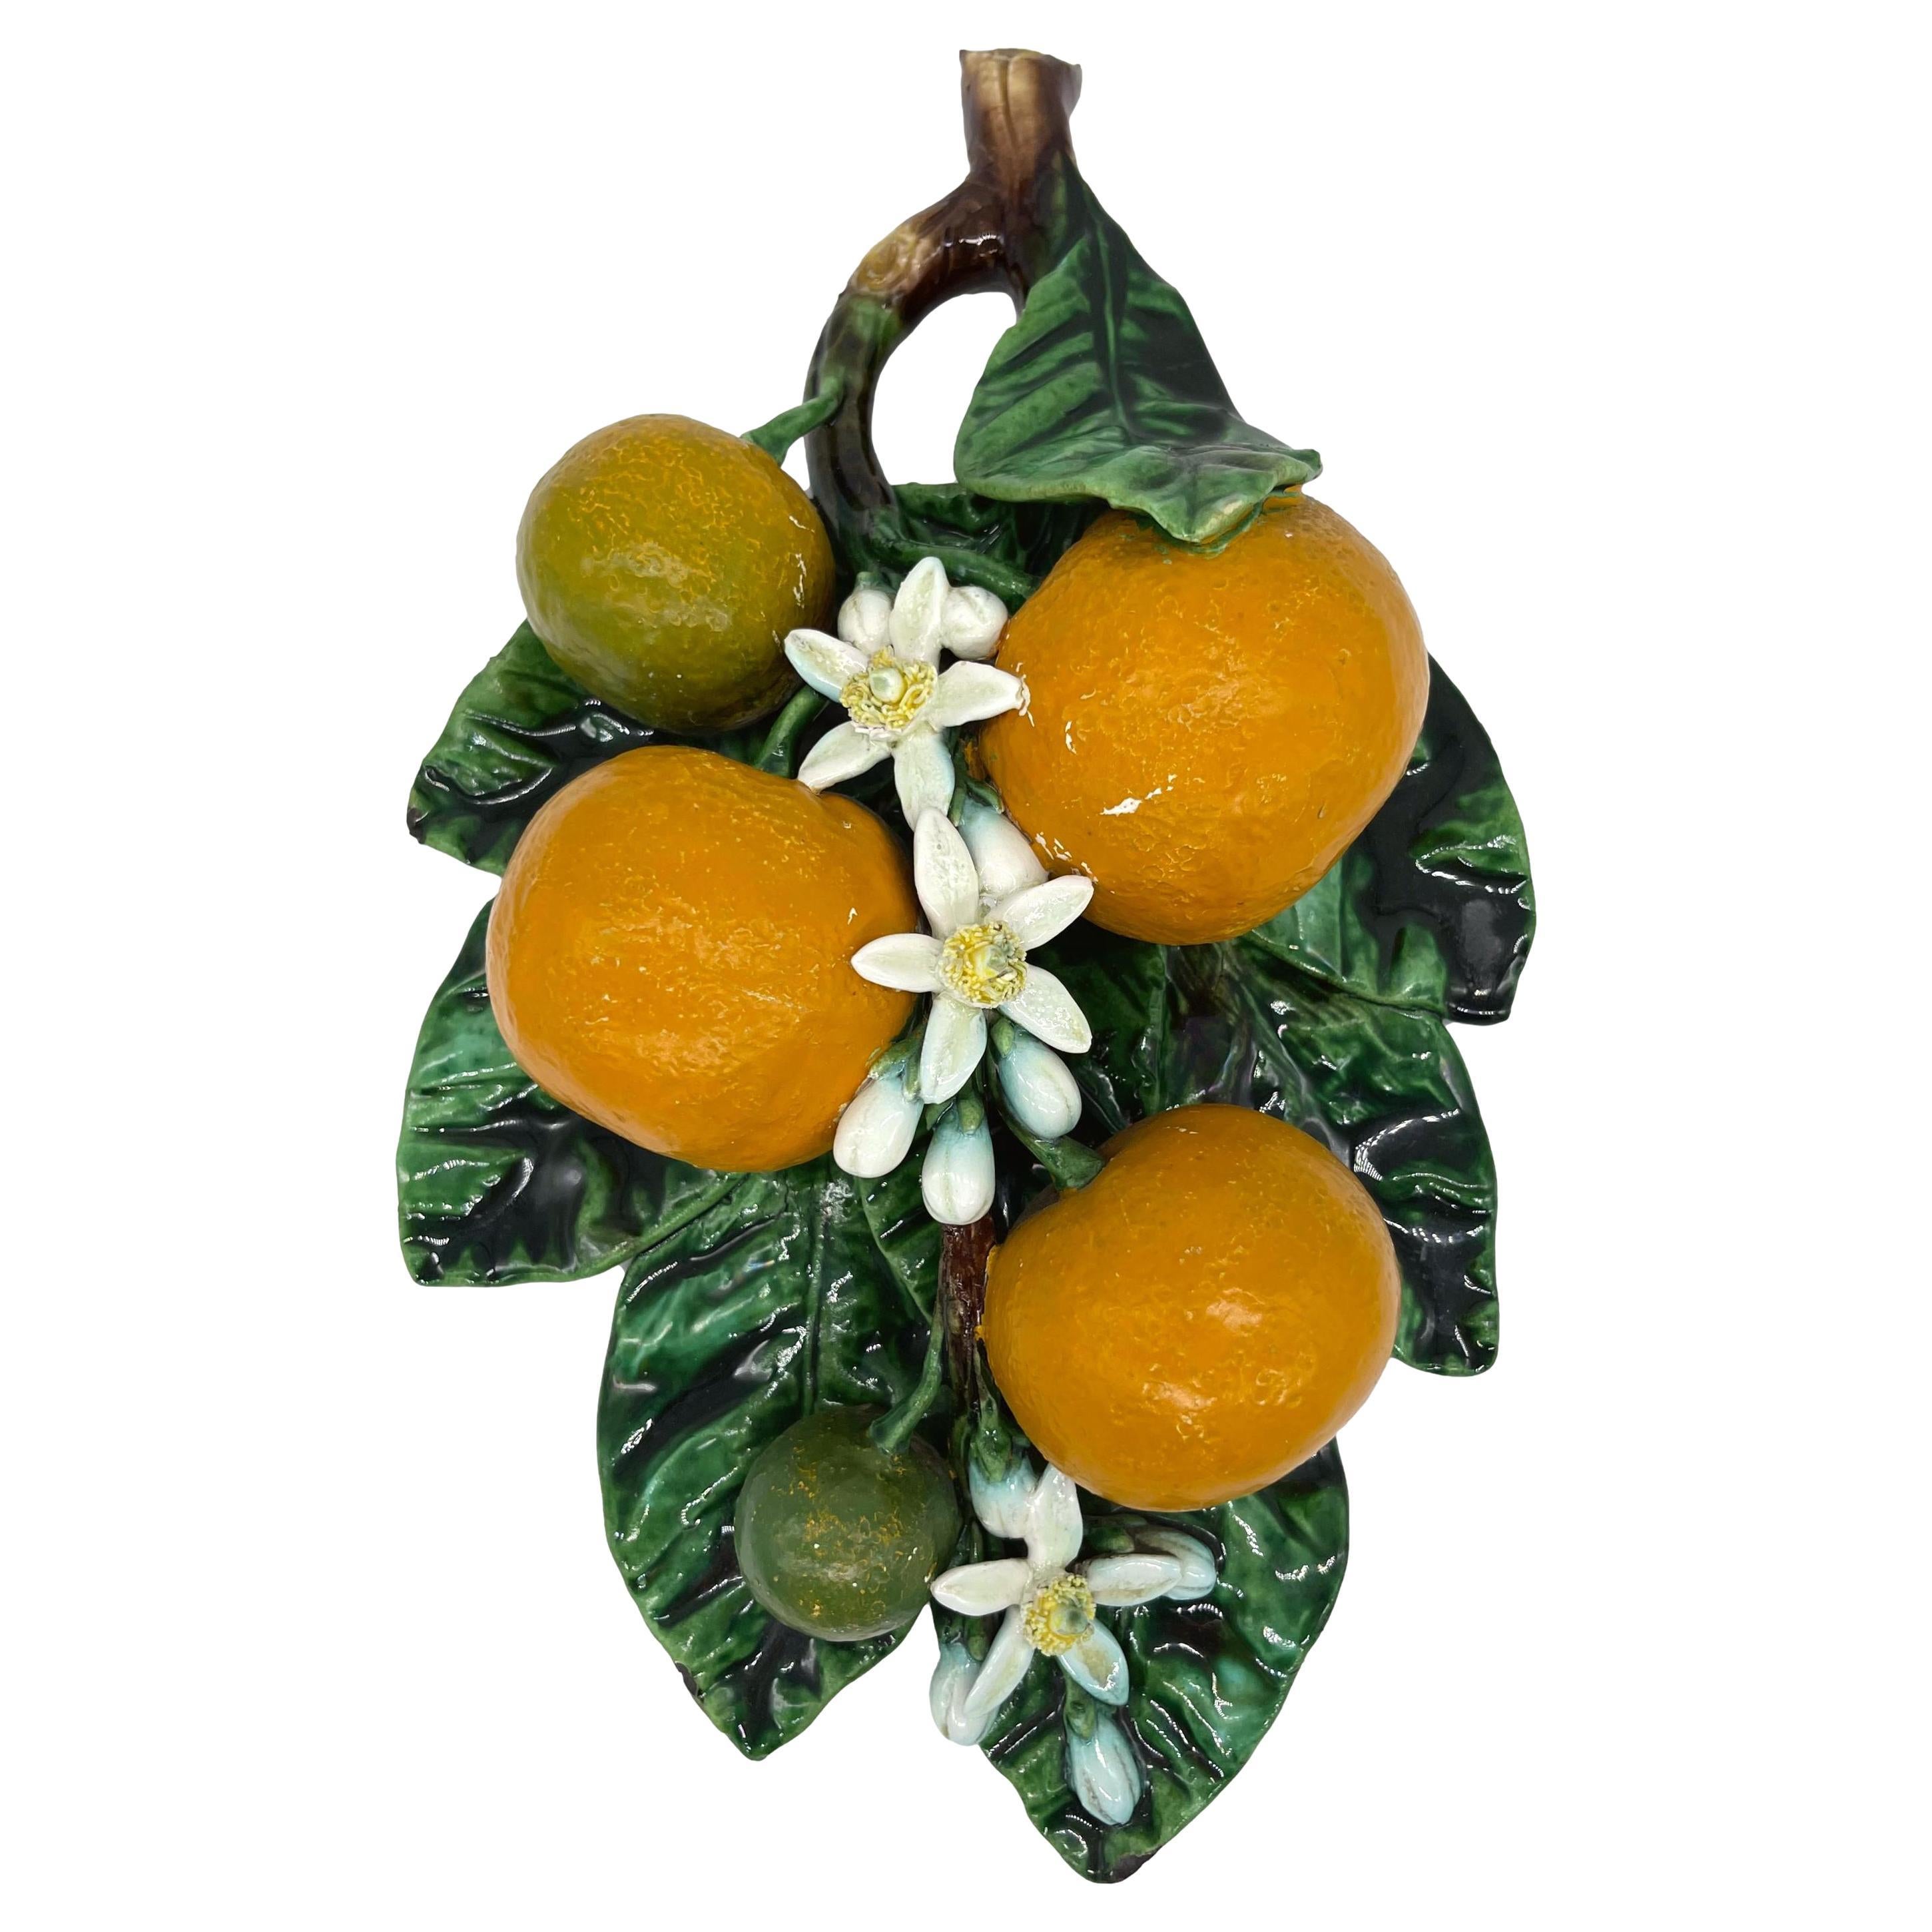 French Majolica Trompe L'oeil Wall Plaque with Oranges by Perret-Gentil, Menton